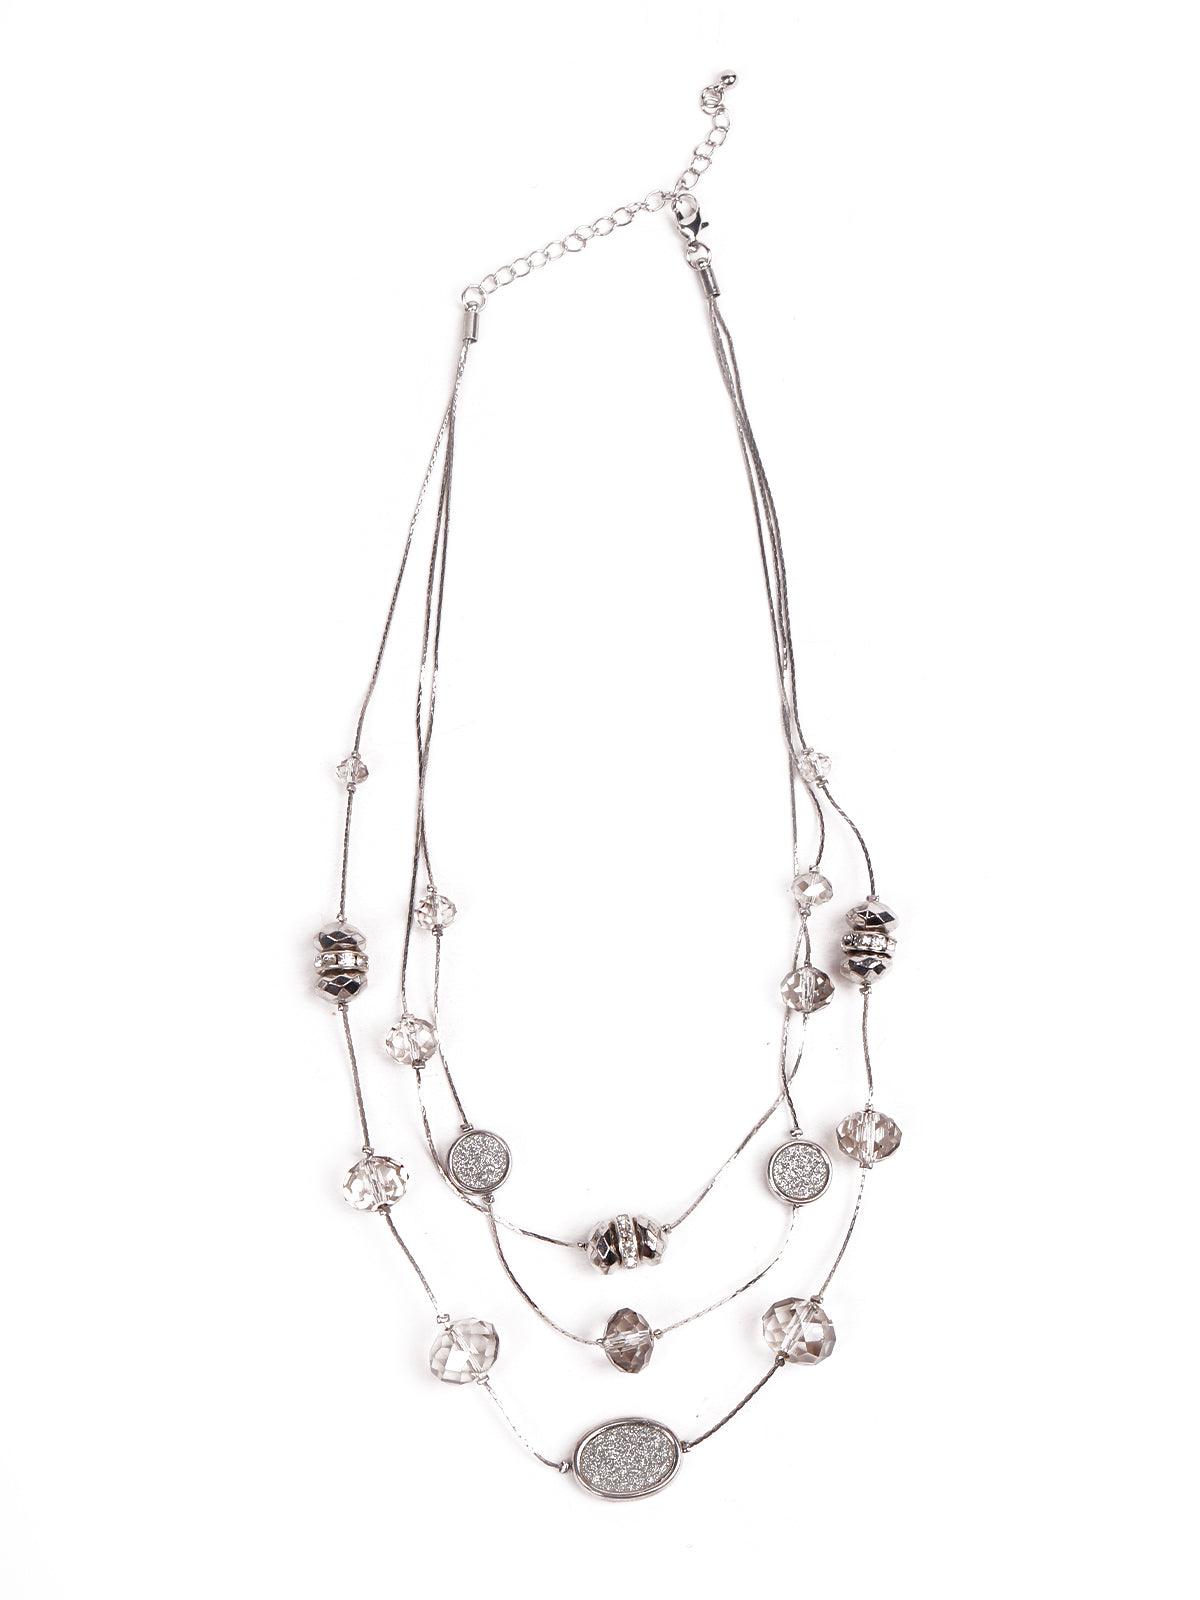 Women's Stunning Silver Beaded Necklace - Odette